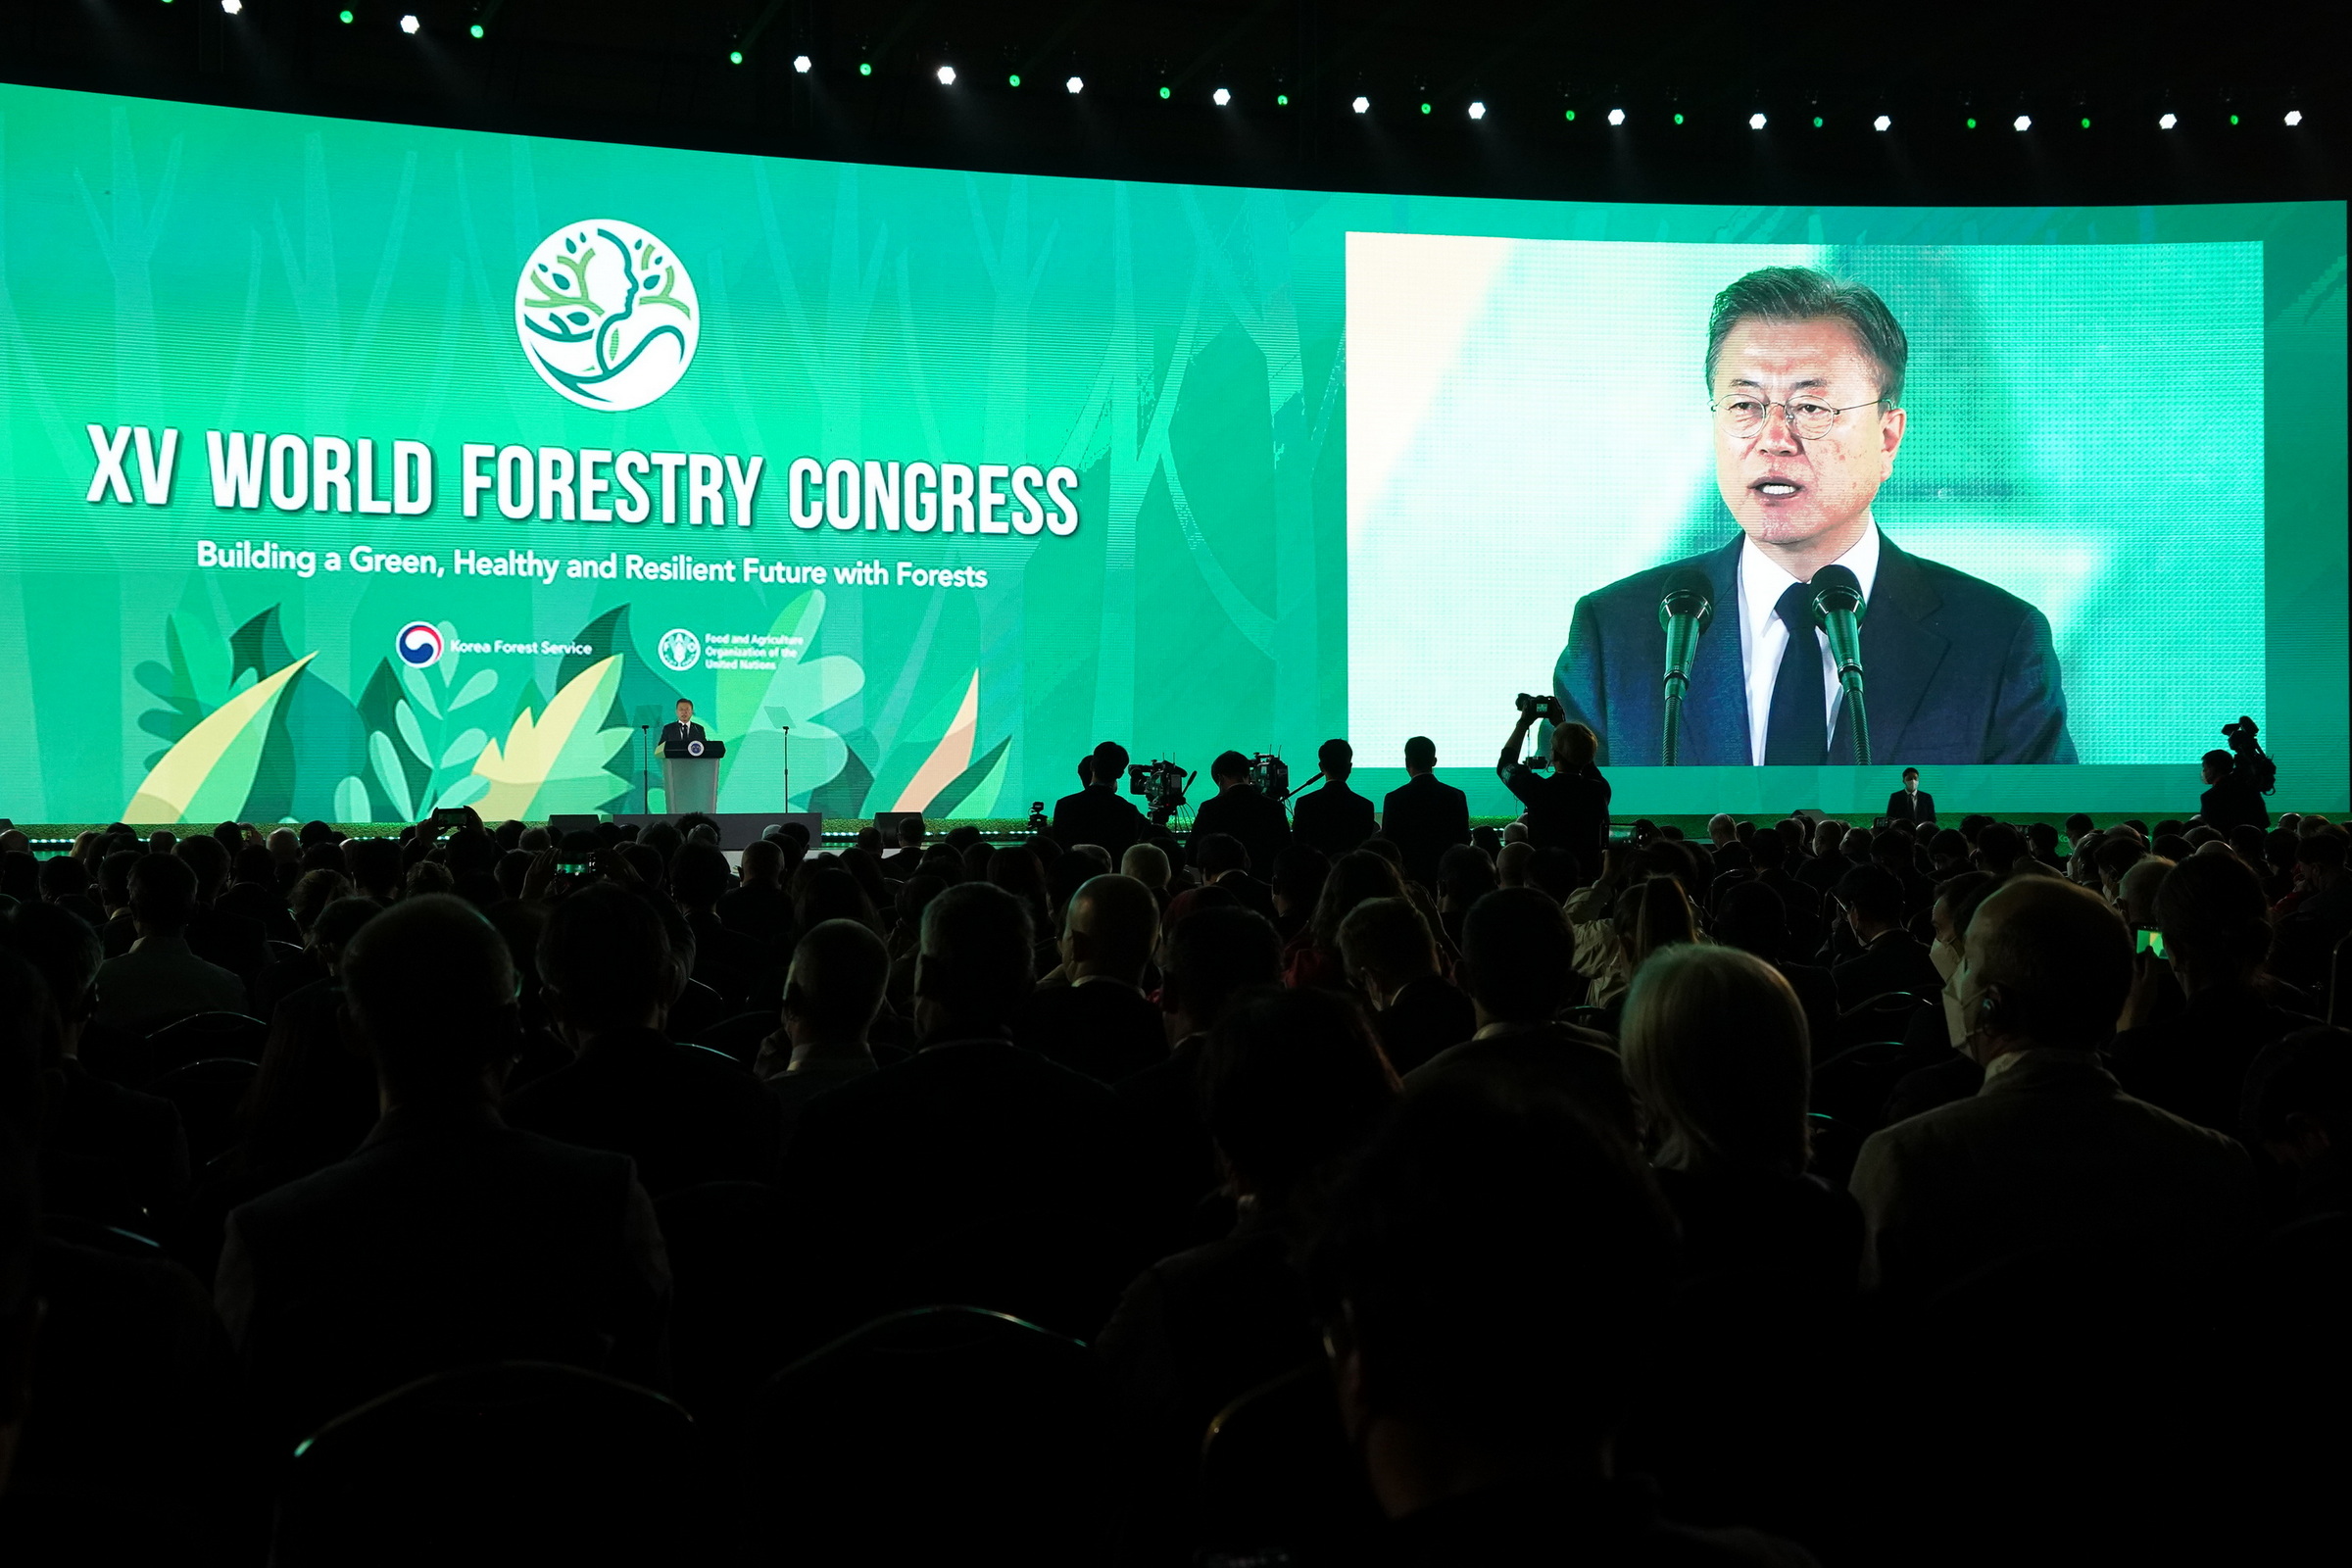 XV World Forestry Congress Ends with Great Success 이미지3